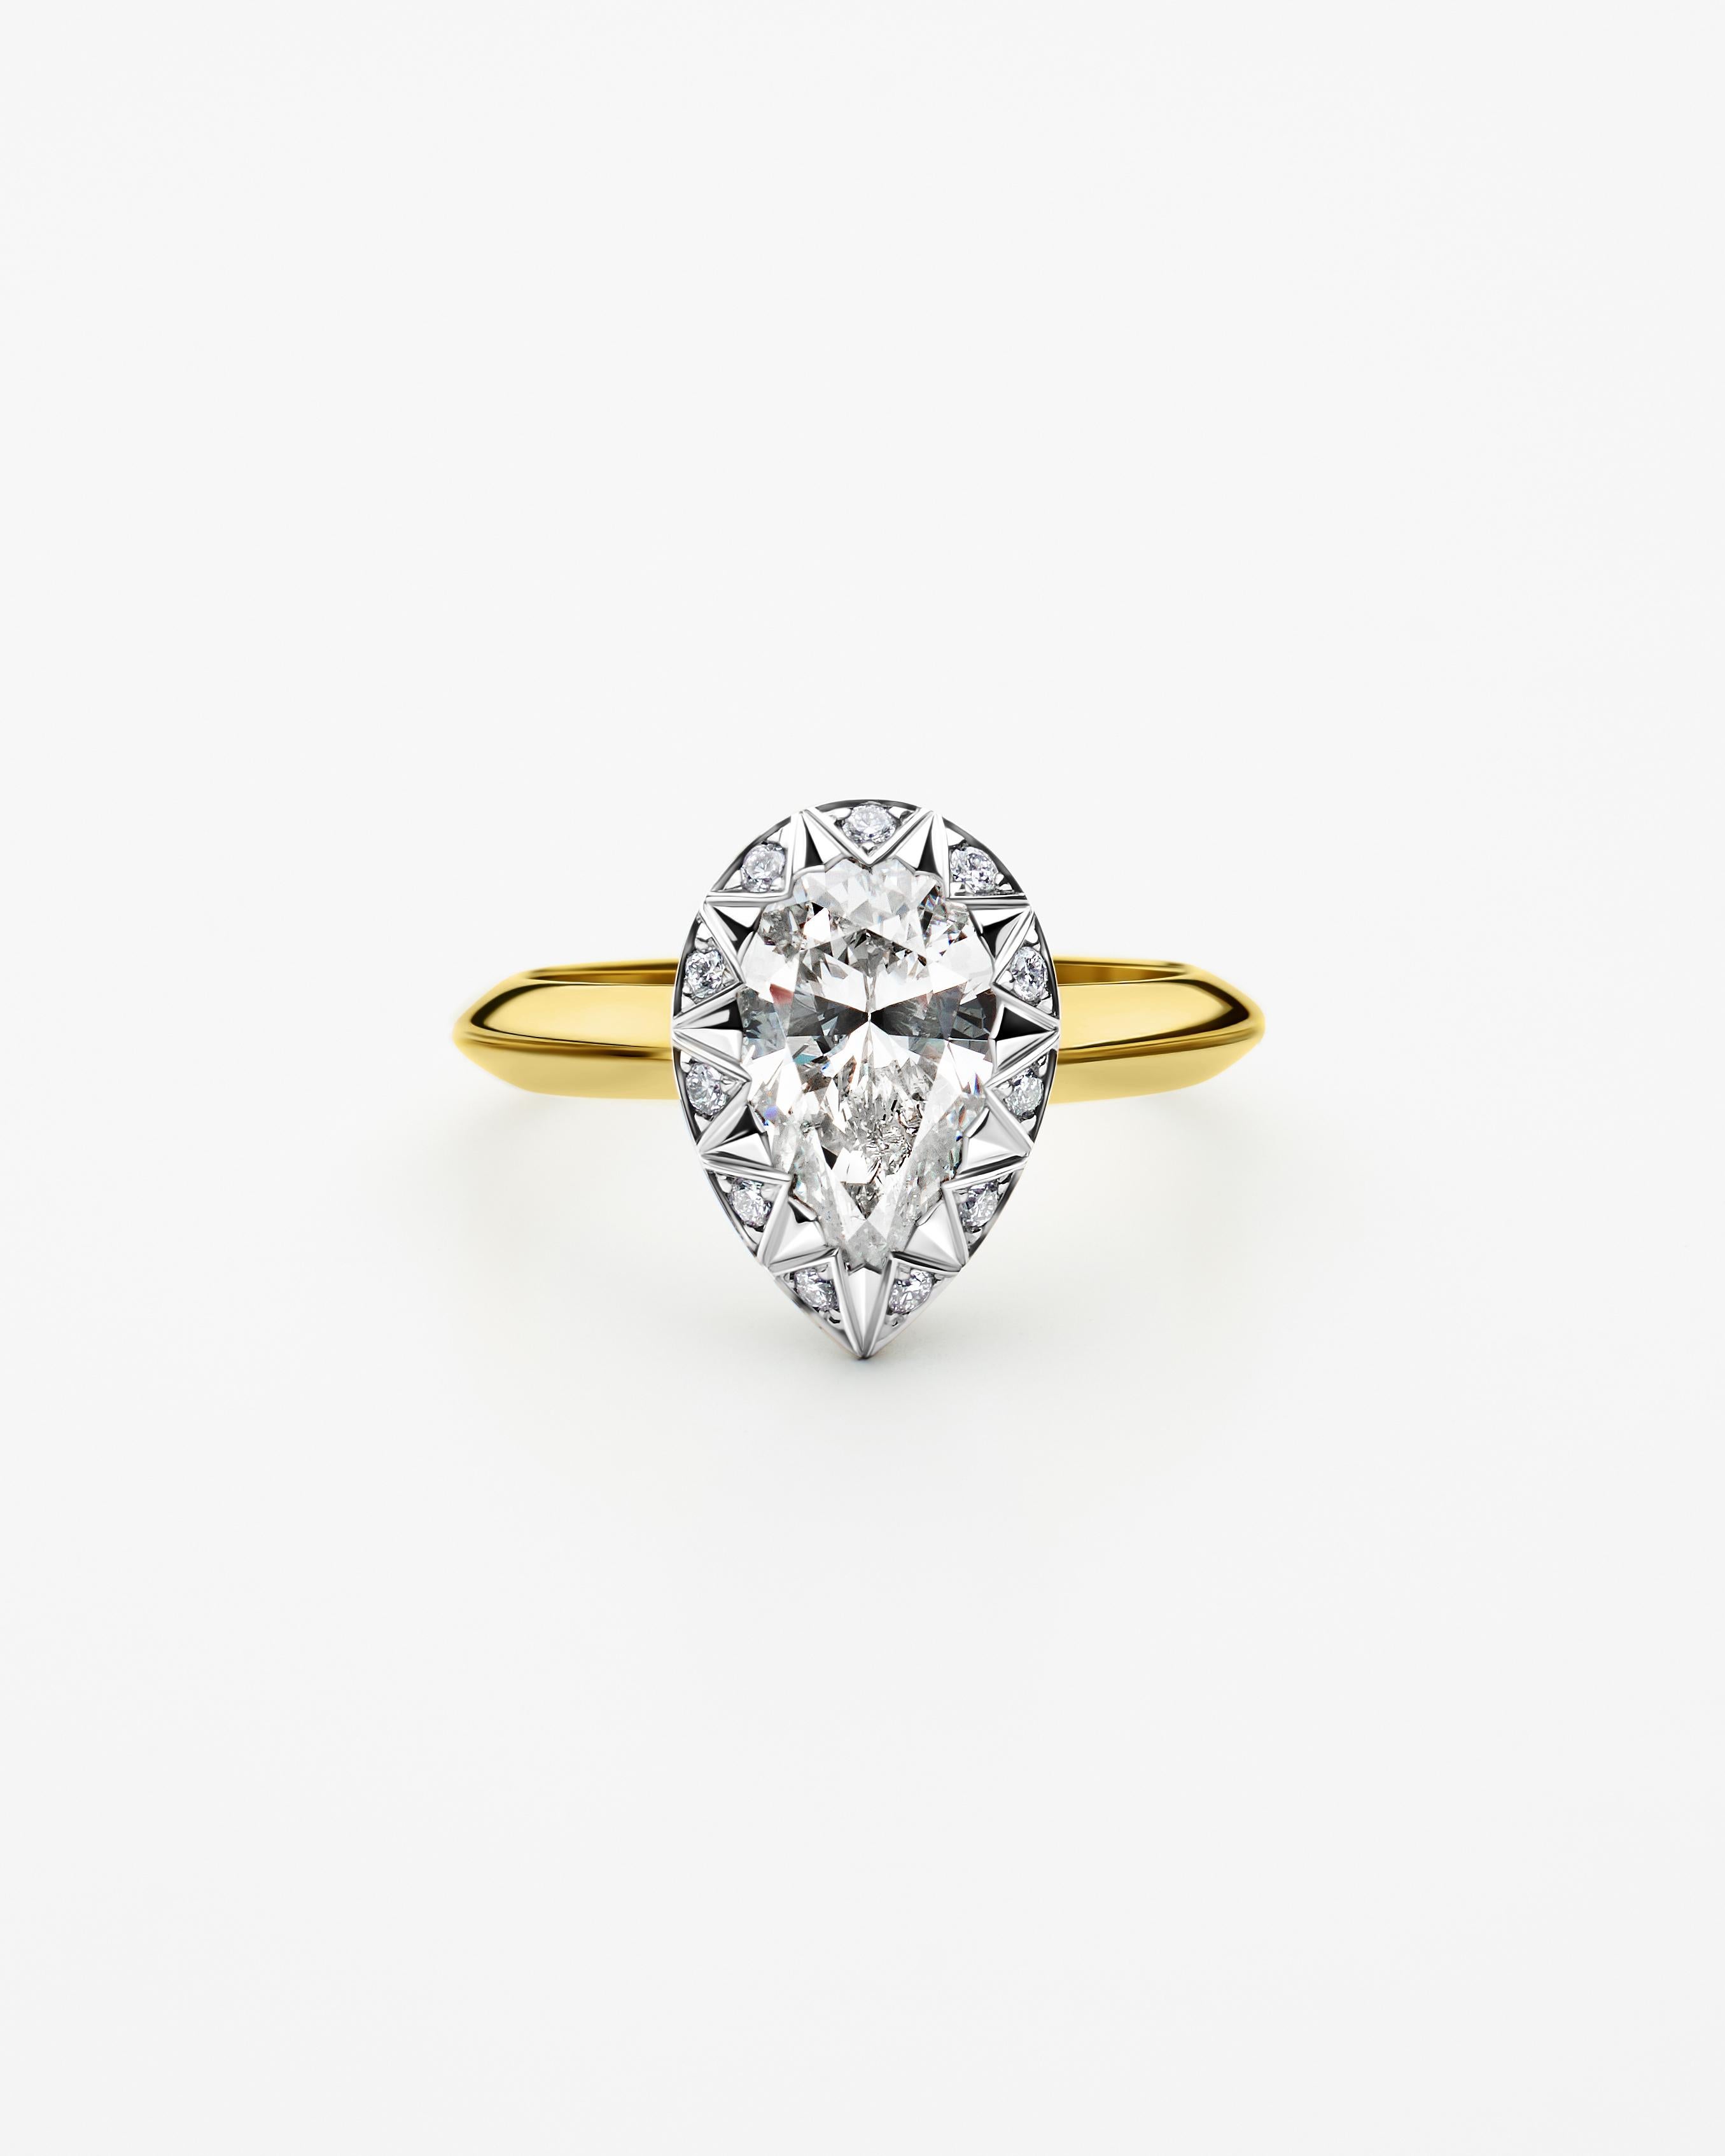 For Sale:  18k Yellow and White Gold Diamond Cocktail Ring w 1.57 Carat Pear Shape Diamond 2